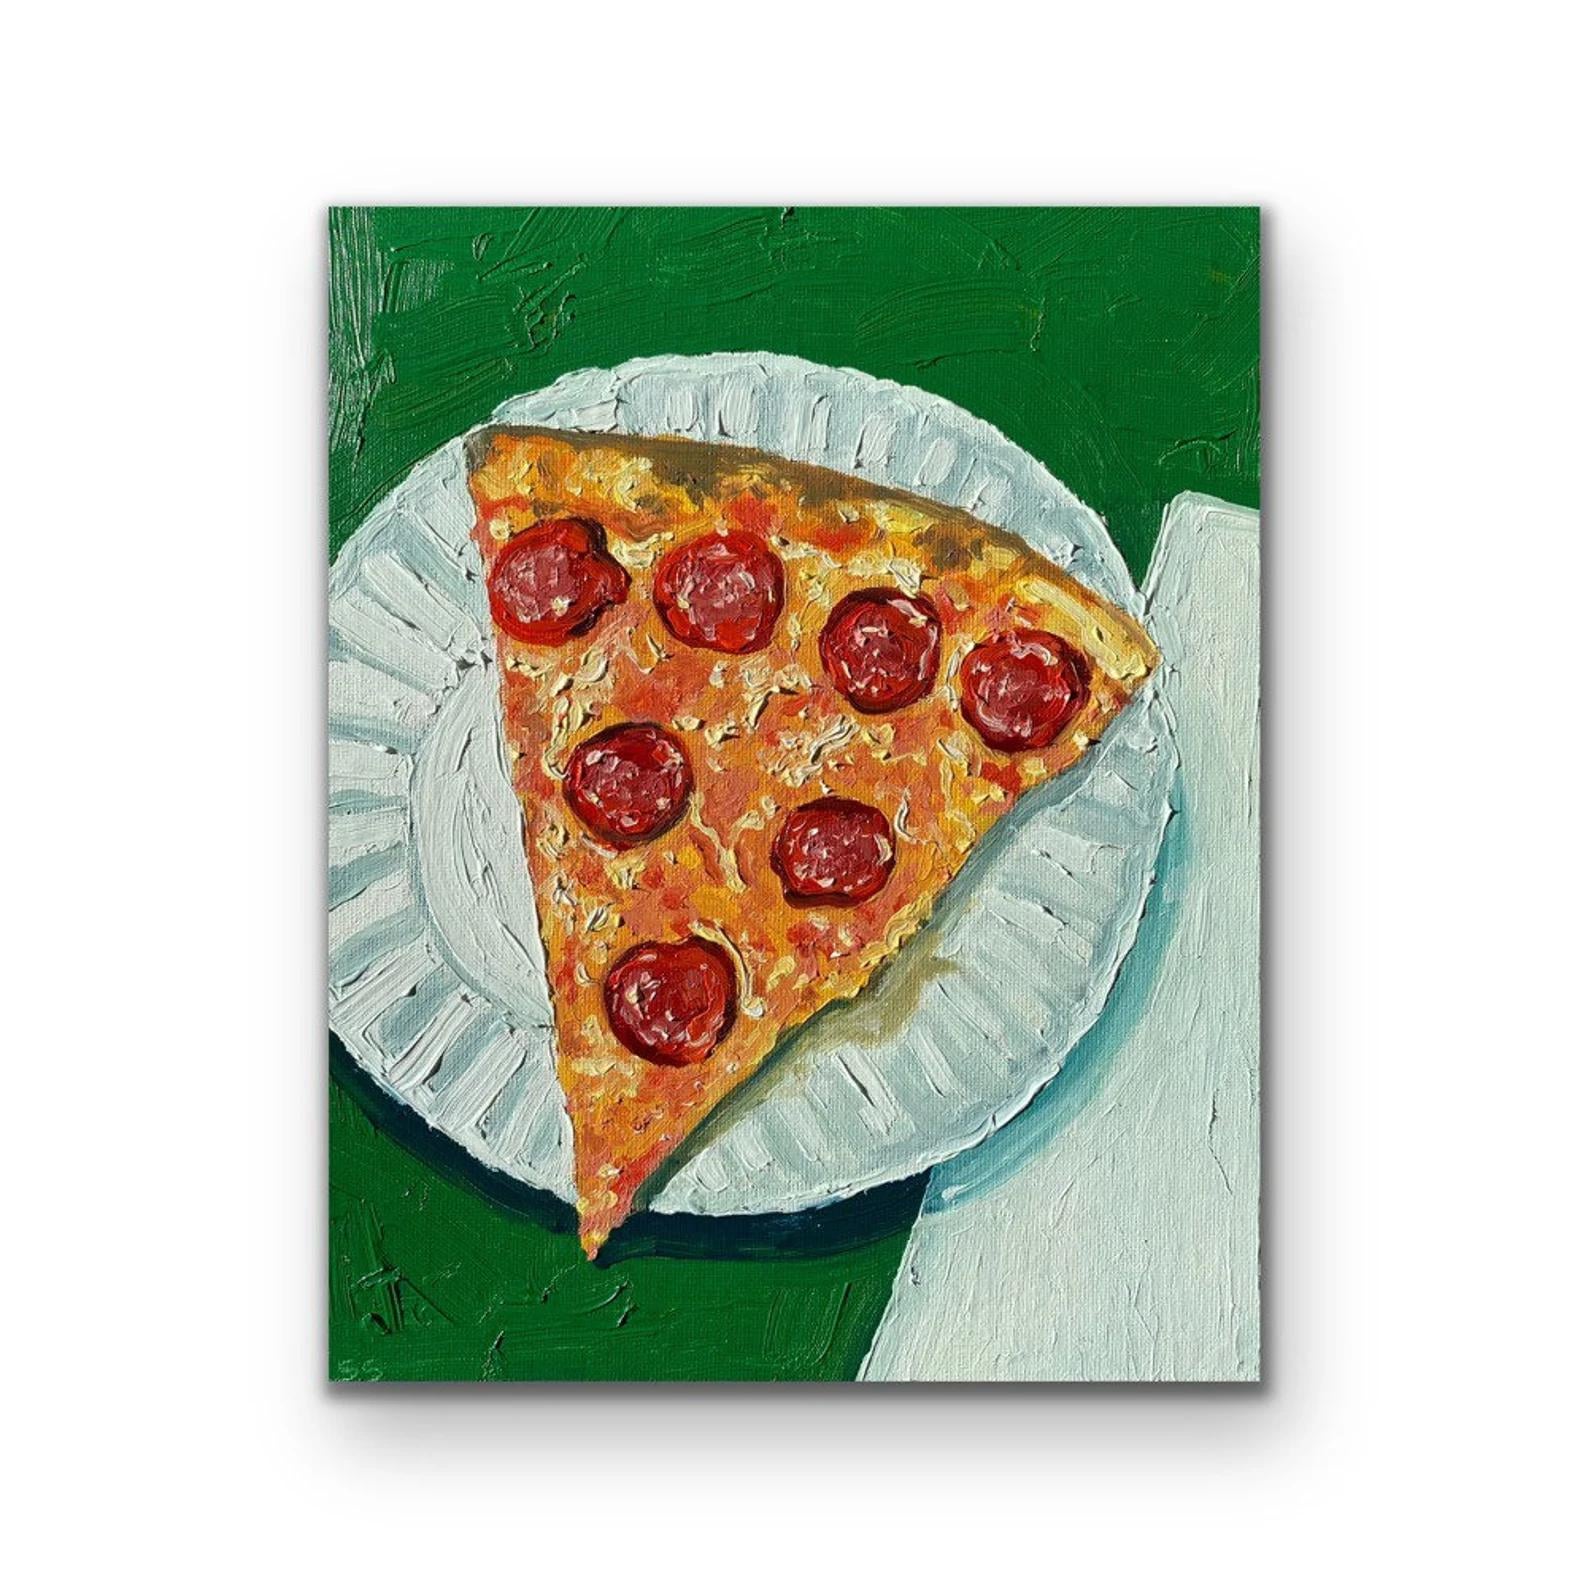 The Pizza Shop: Where Every Slice is a Masterpiece